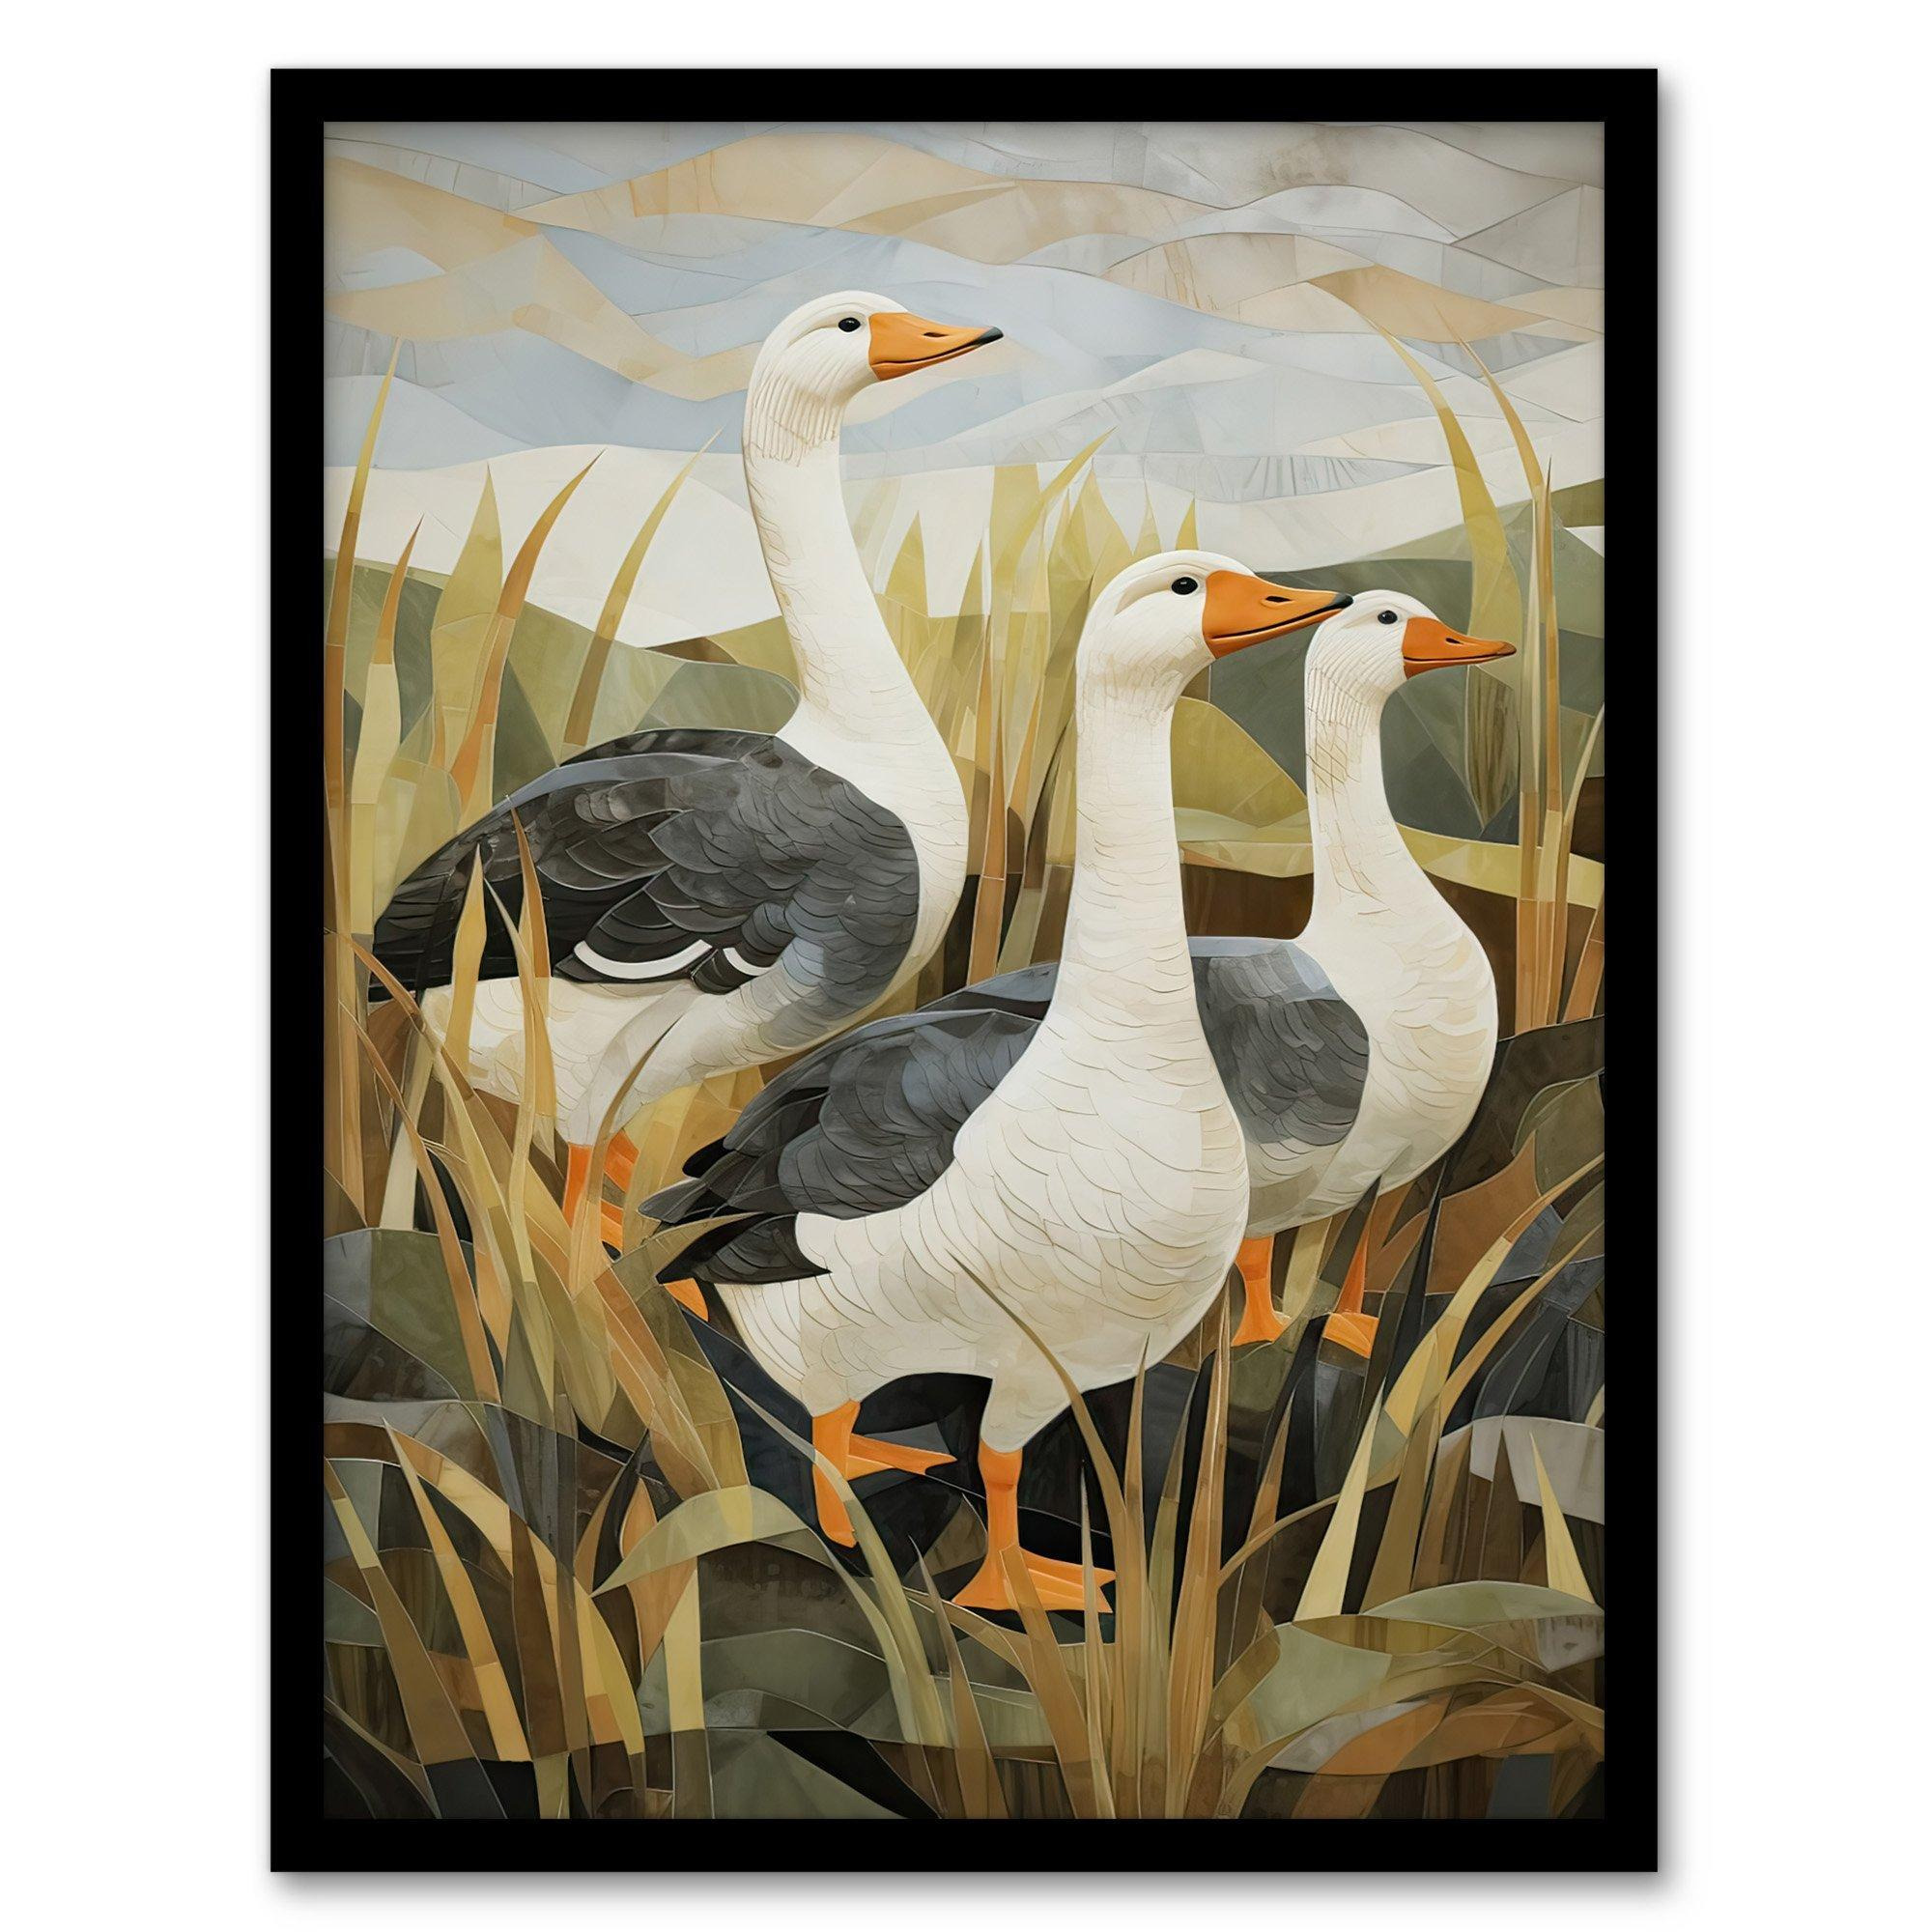 Three Wild Geese Stylised Oil Painting Grey Orange Green Pastel Colour Birds in Sweet Flag Plant Countryside Landscape Artwork Framed Wall Art Print - image 1